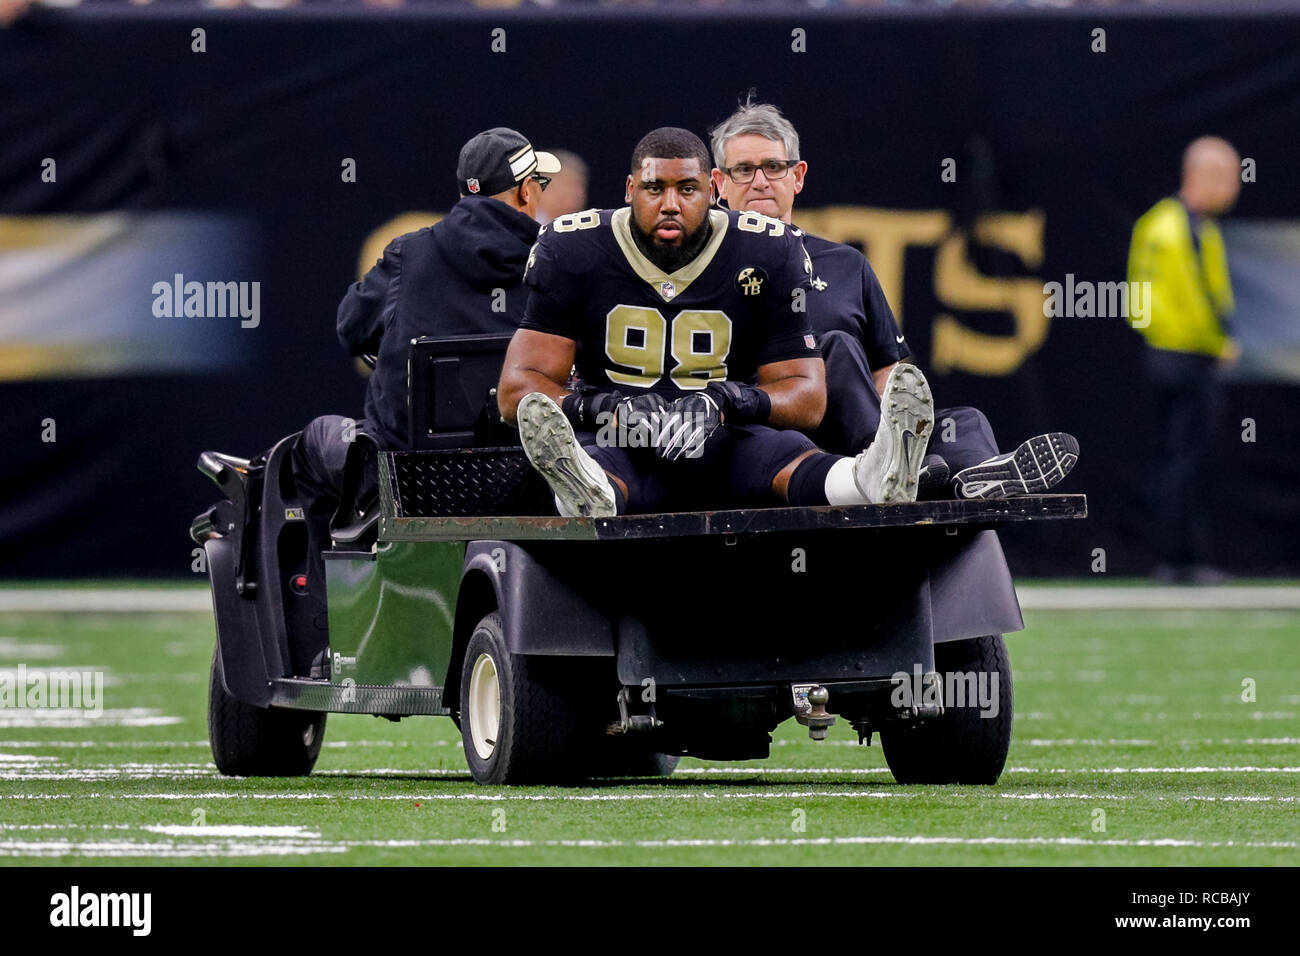 New Orleans, LA, USA. 13th Jan, 2019. New Orleans Saints defensive tackle Sheldon Rankins (98) is carted off the field with a torn achilles against Philadelphia Eagles at the Mercedes-Benz Superdome in New Orleans, LA. Stephen Lew/CSM/Alamy Live News Stock Photo